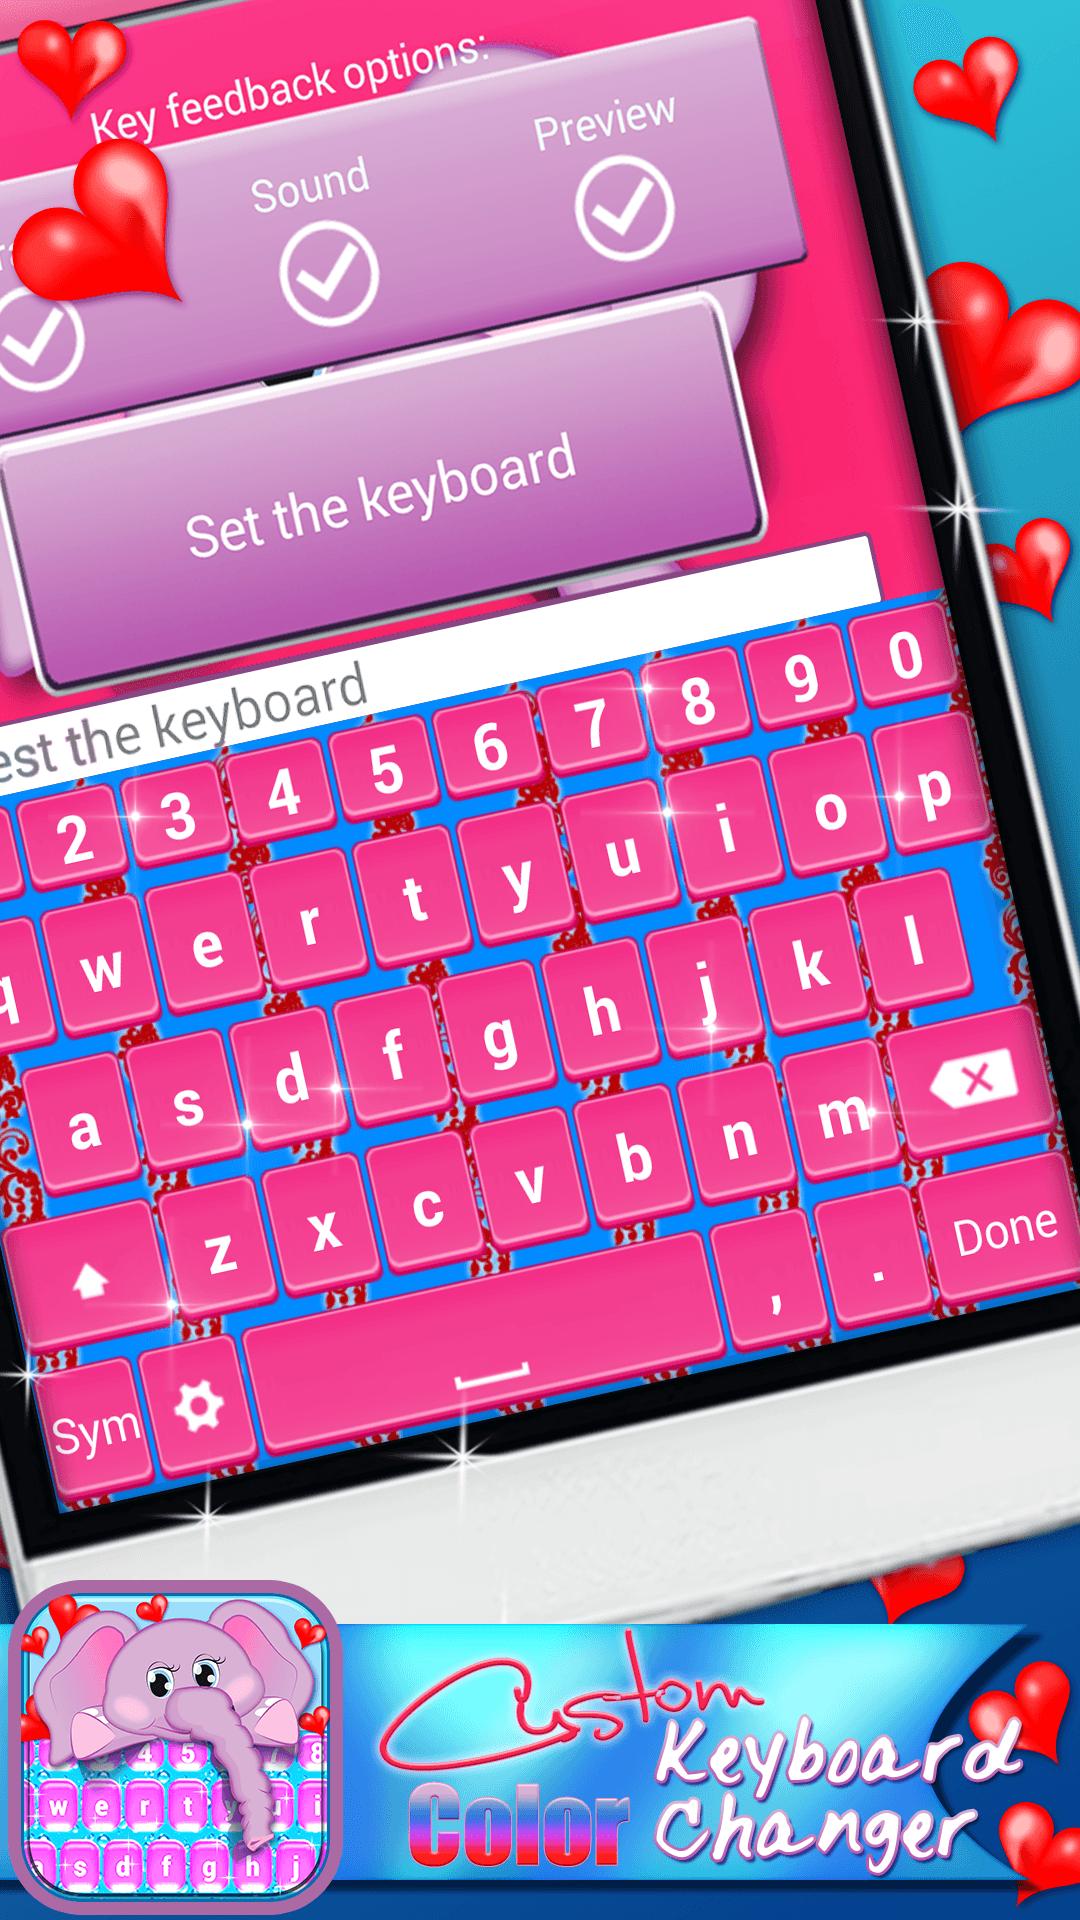 Custom Keyboard Color Changer for Android - APK Download